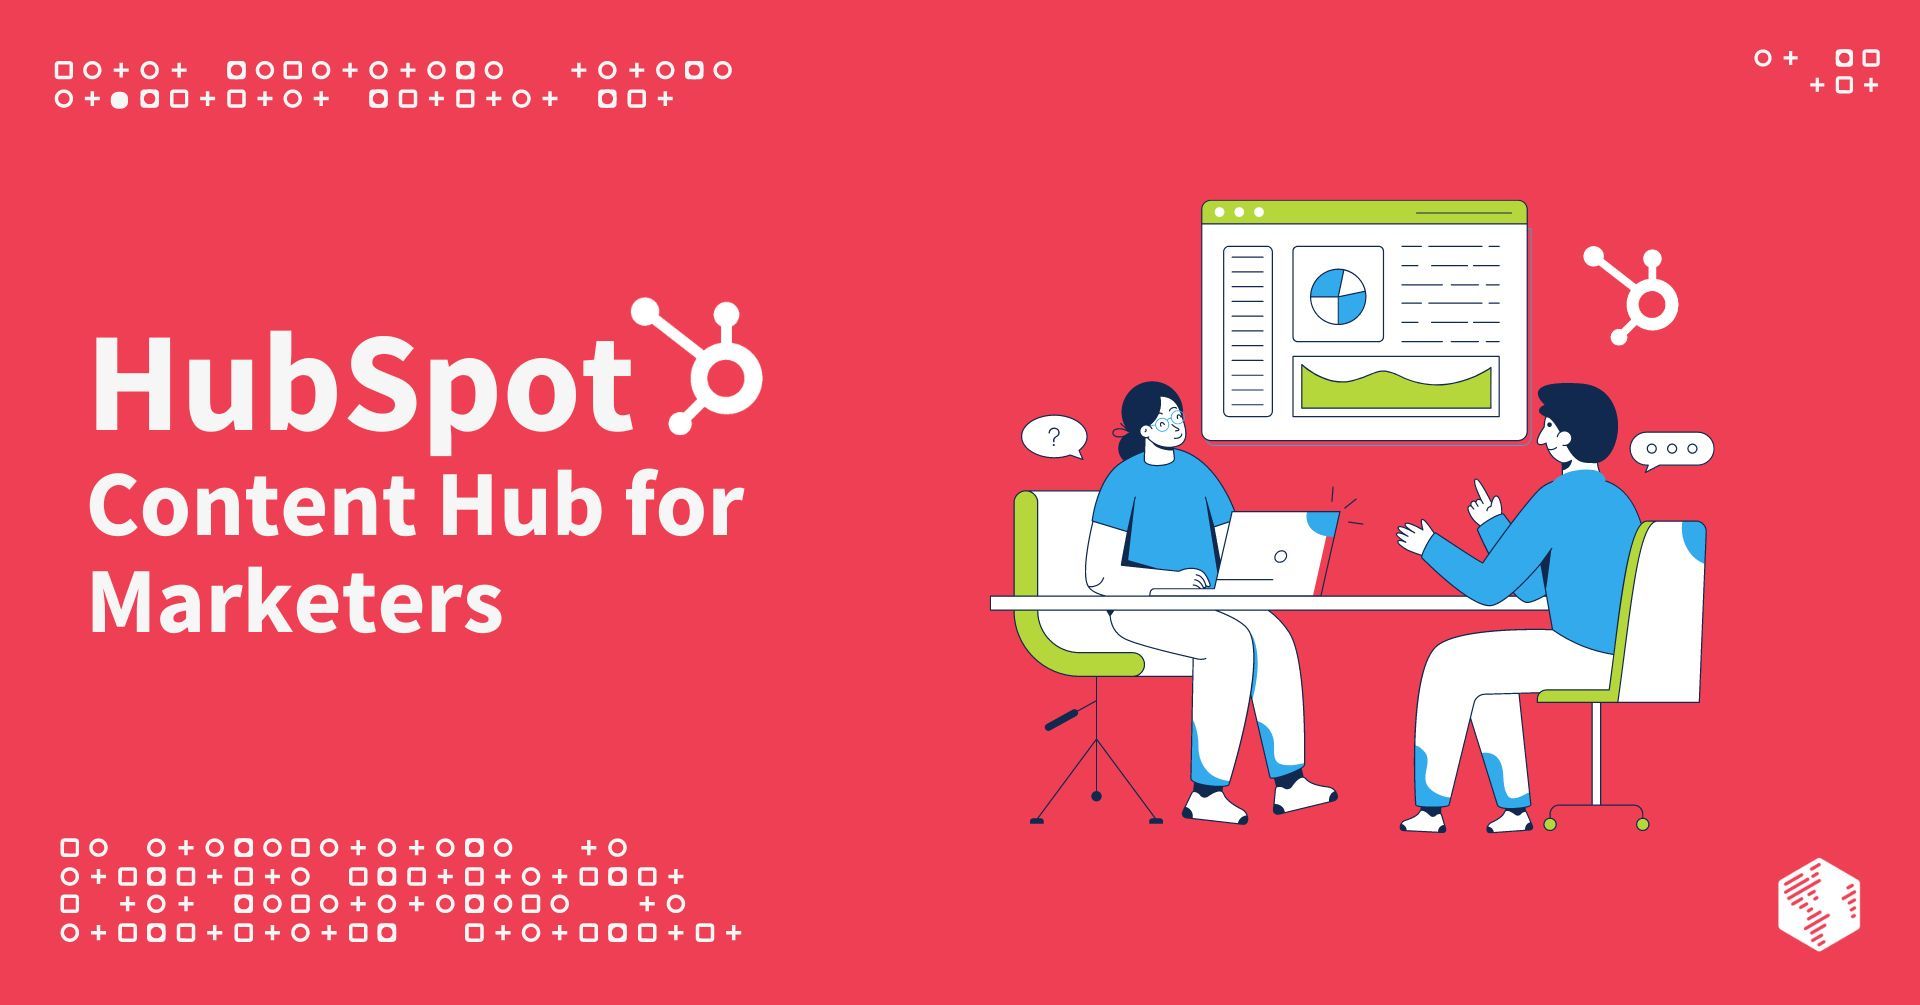 HubSpot Content Hub: All-In-One AI-Powered Platform for Marketers